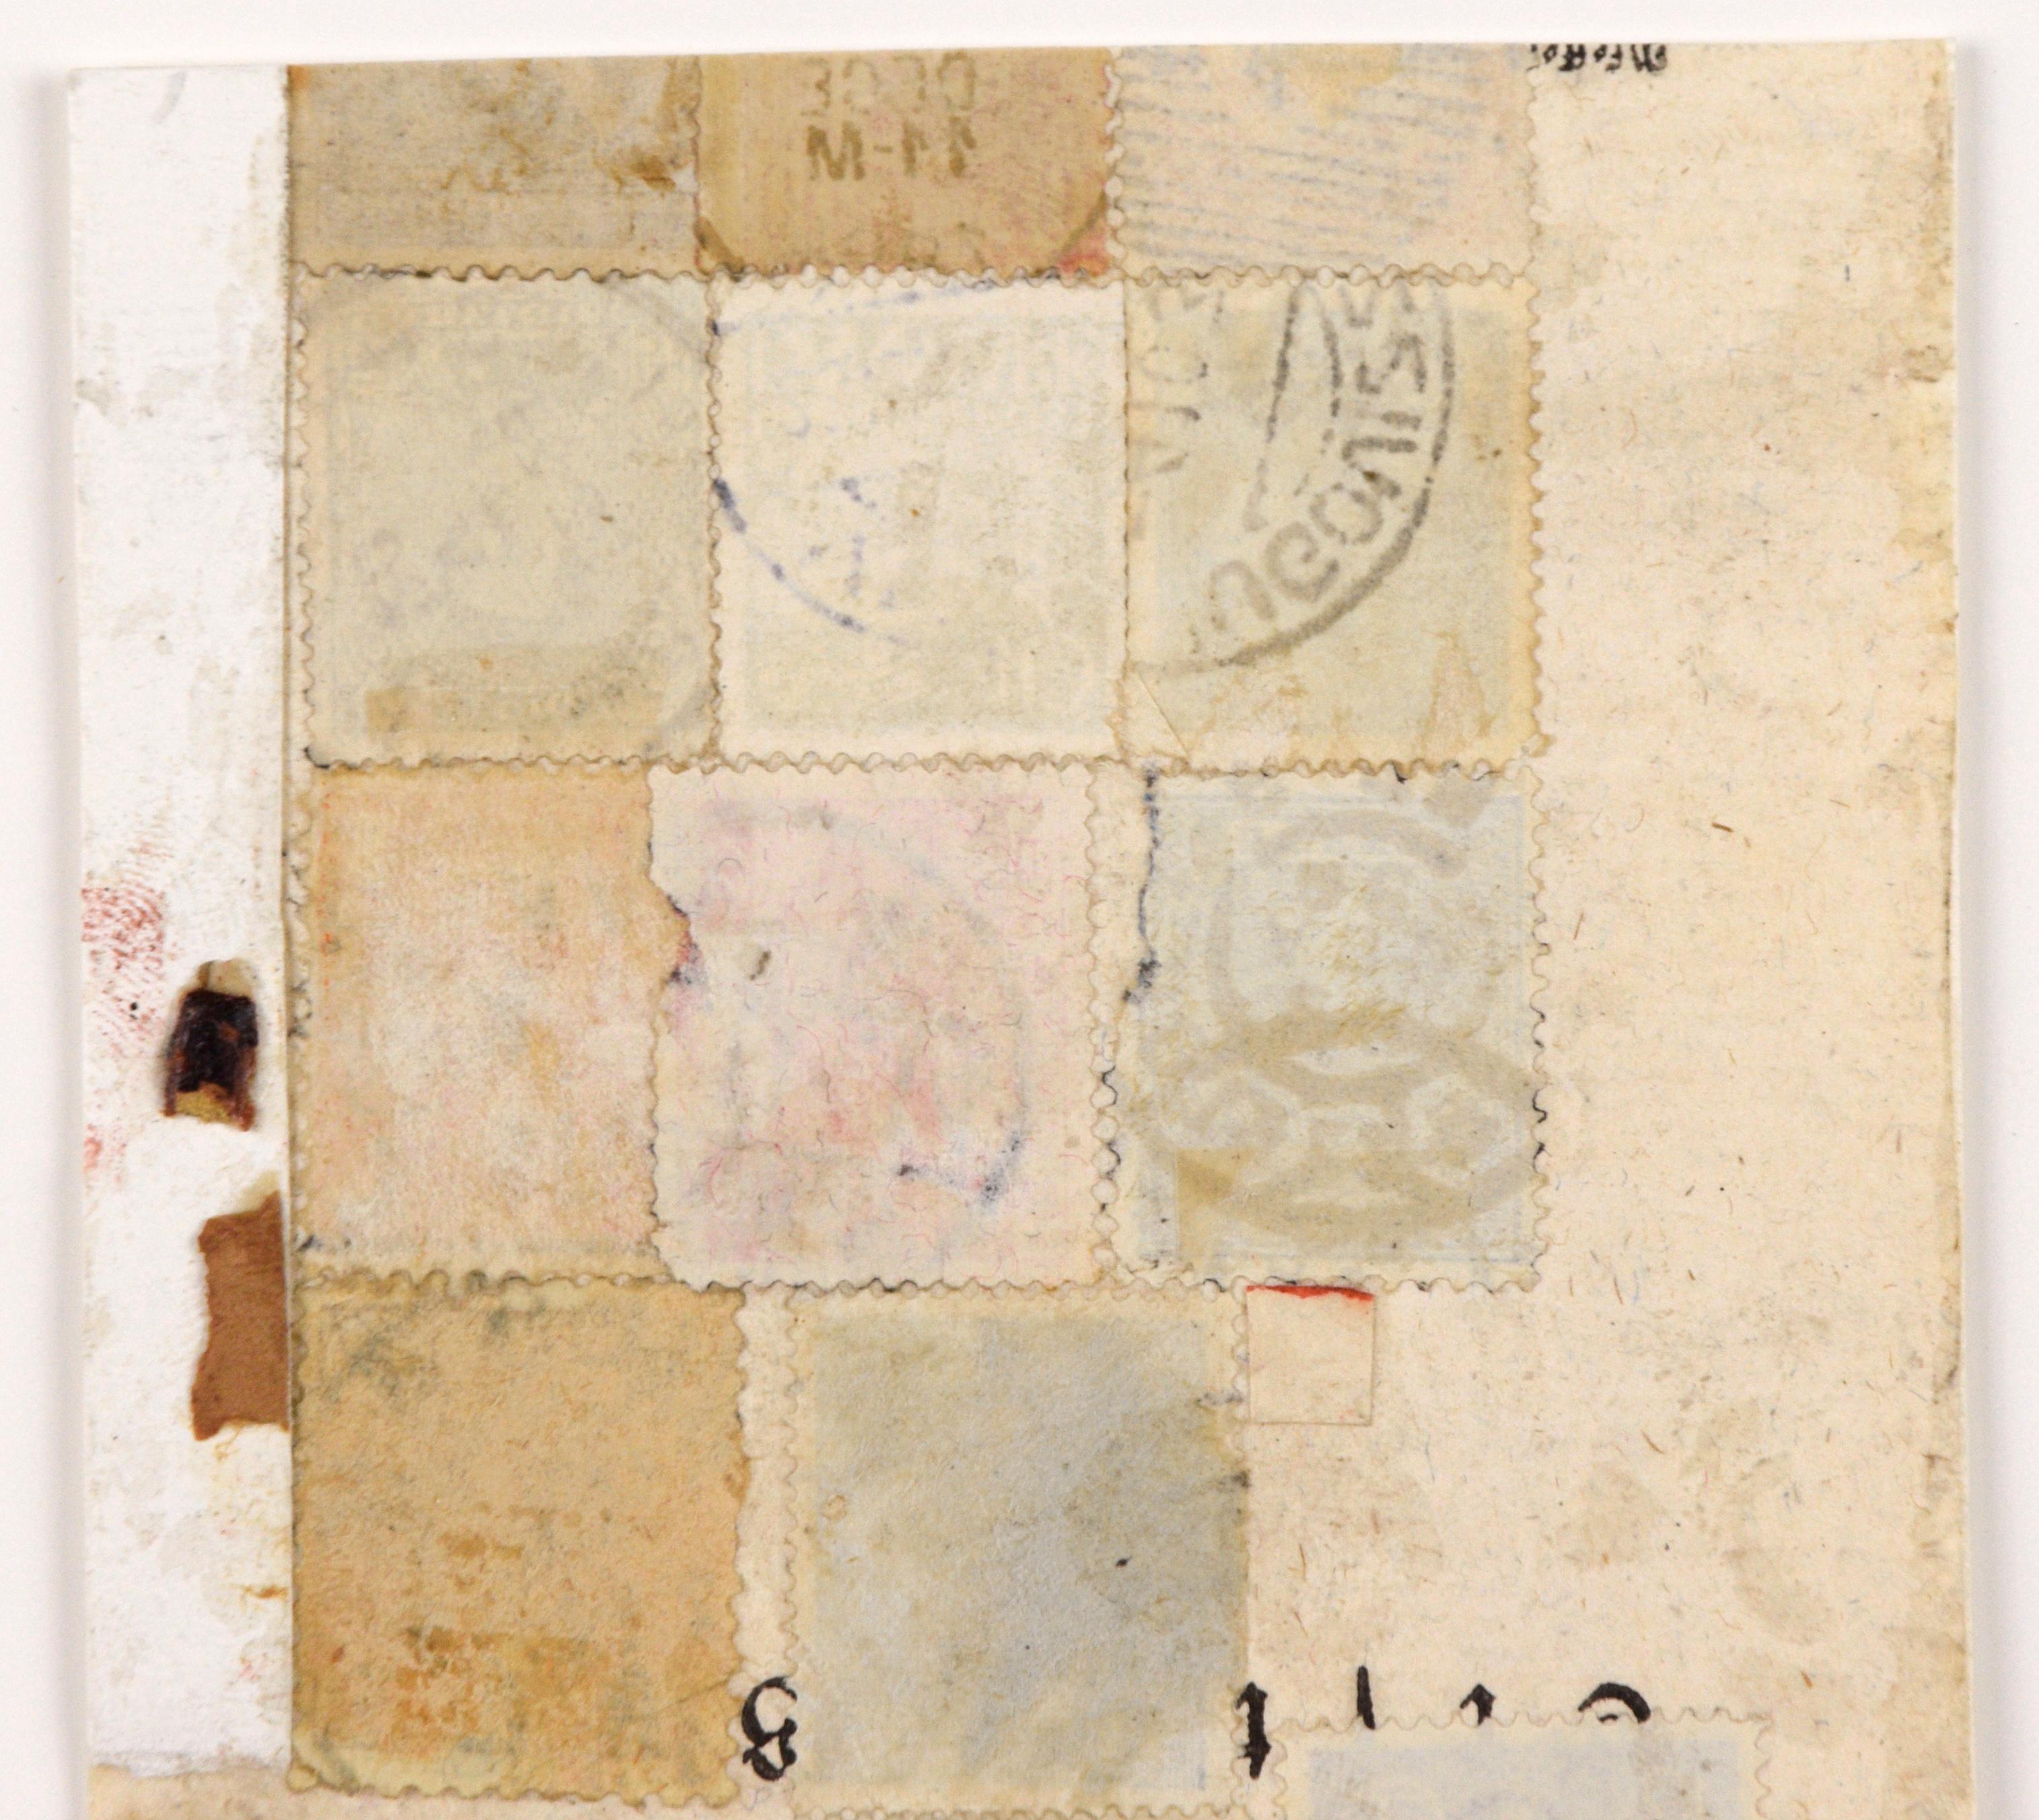 Contemporary miniature mixed media paper and found object vintage stamp collage by Michael Pauker (American, b. 1957). Unsigned, but was acquired with a collection of the artist's work. Numbered and titled 